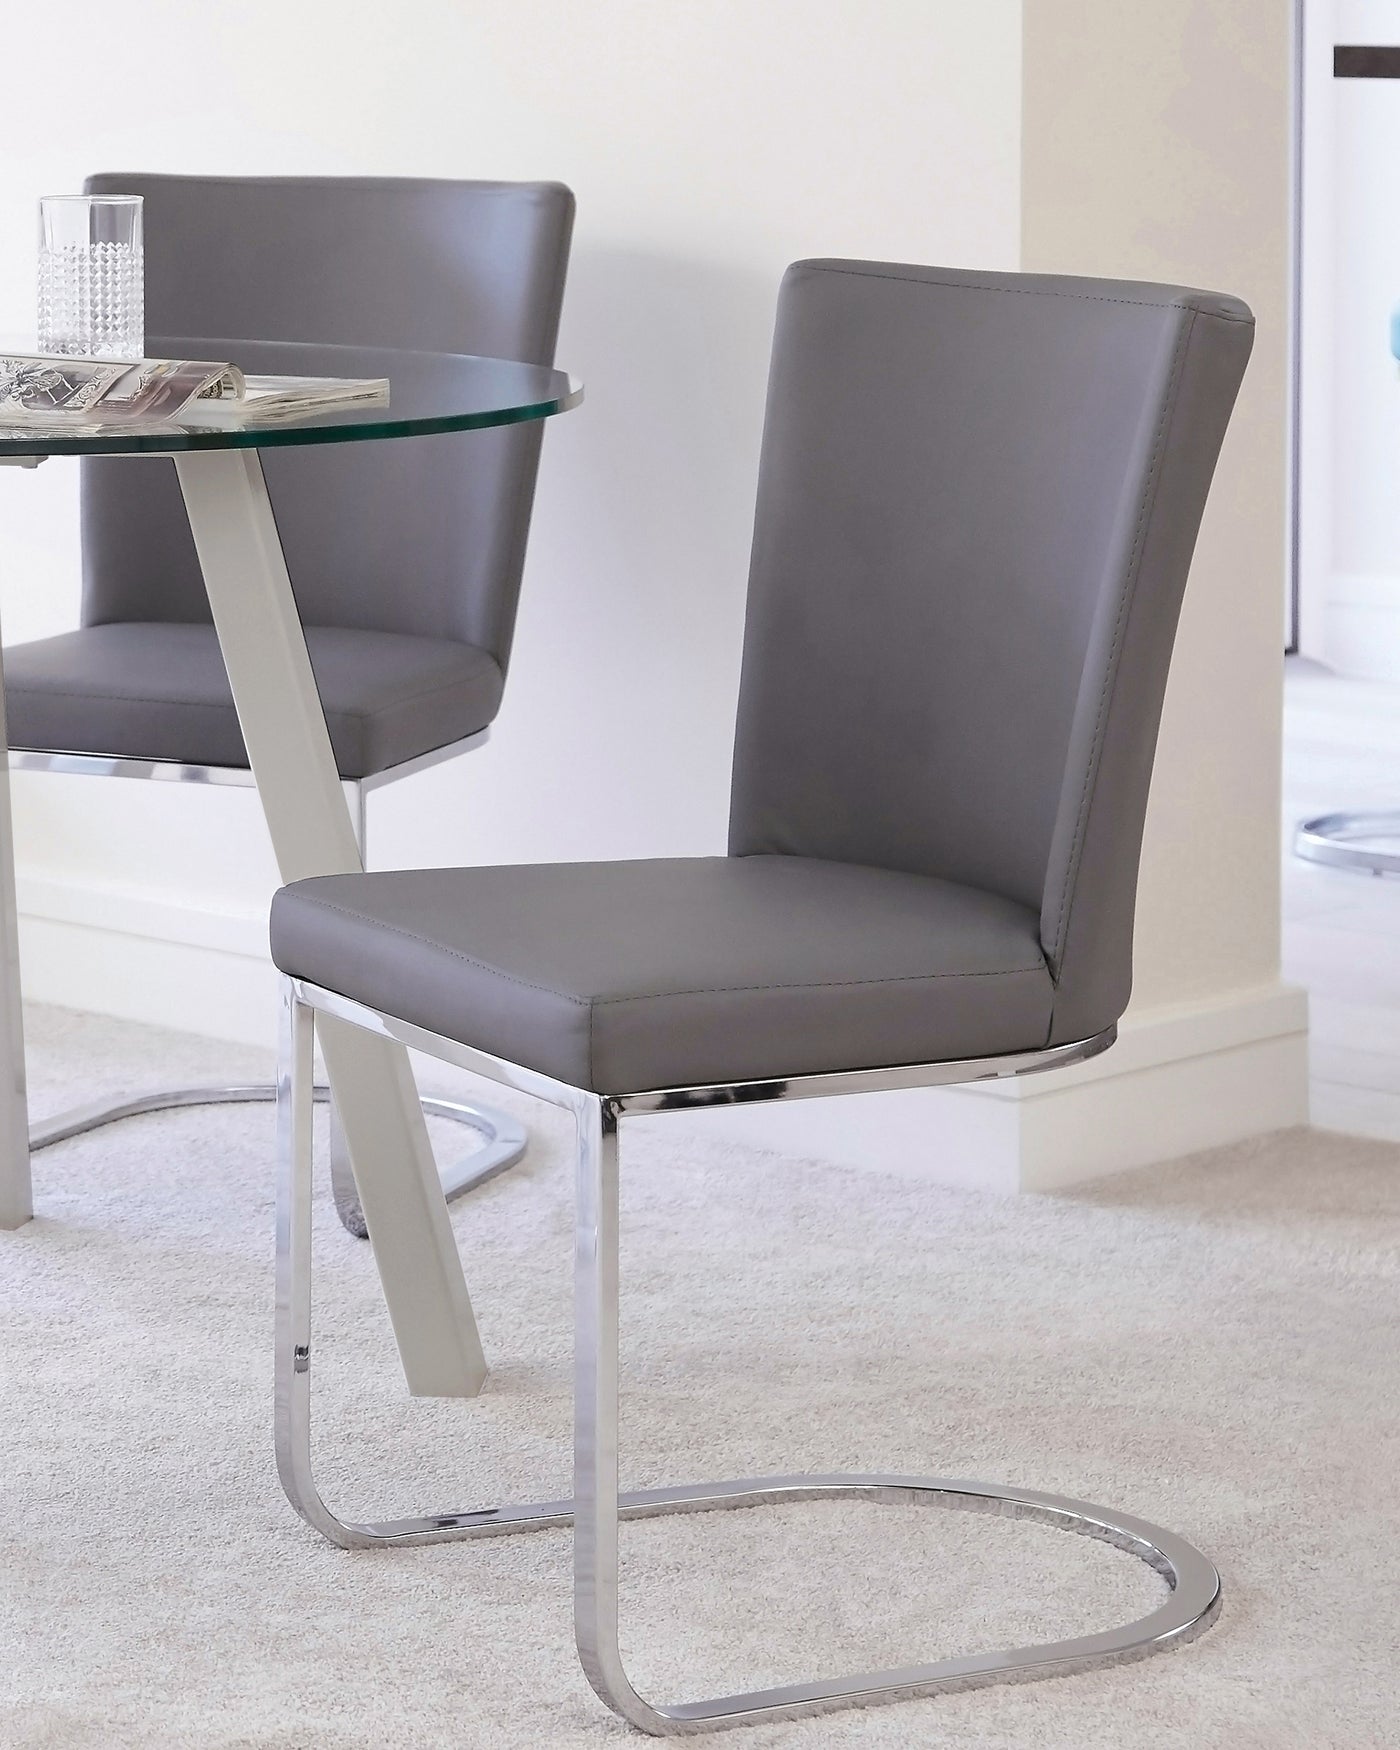 Modern grey upholstered dining chair with a rectangular high backrest and cantilever chrome base, alongside a round glass table with a single chrome leg support.